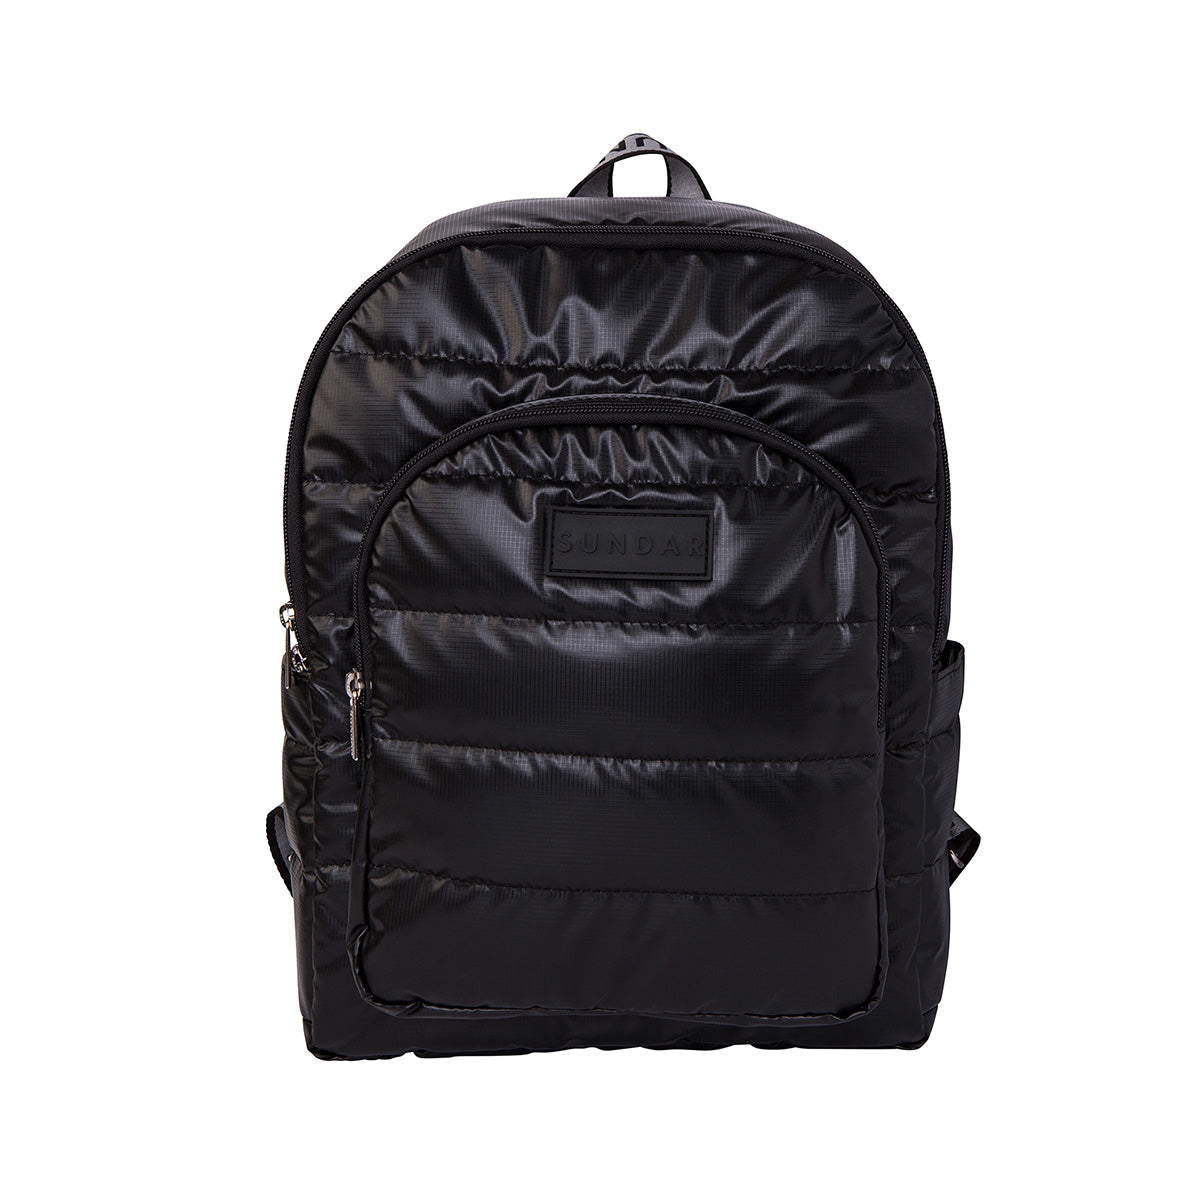 Backpack Lety Negra